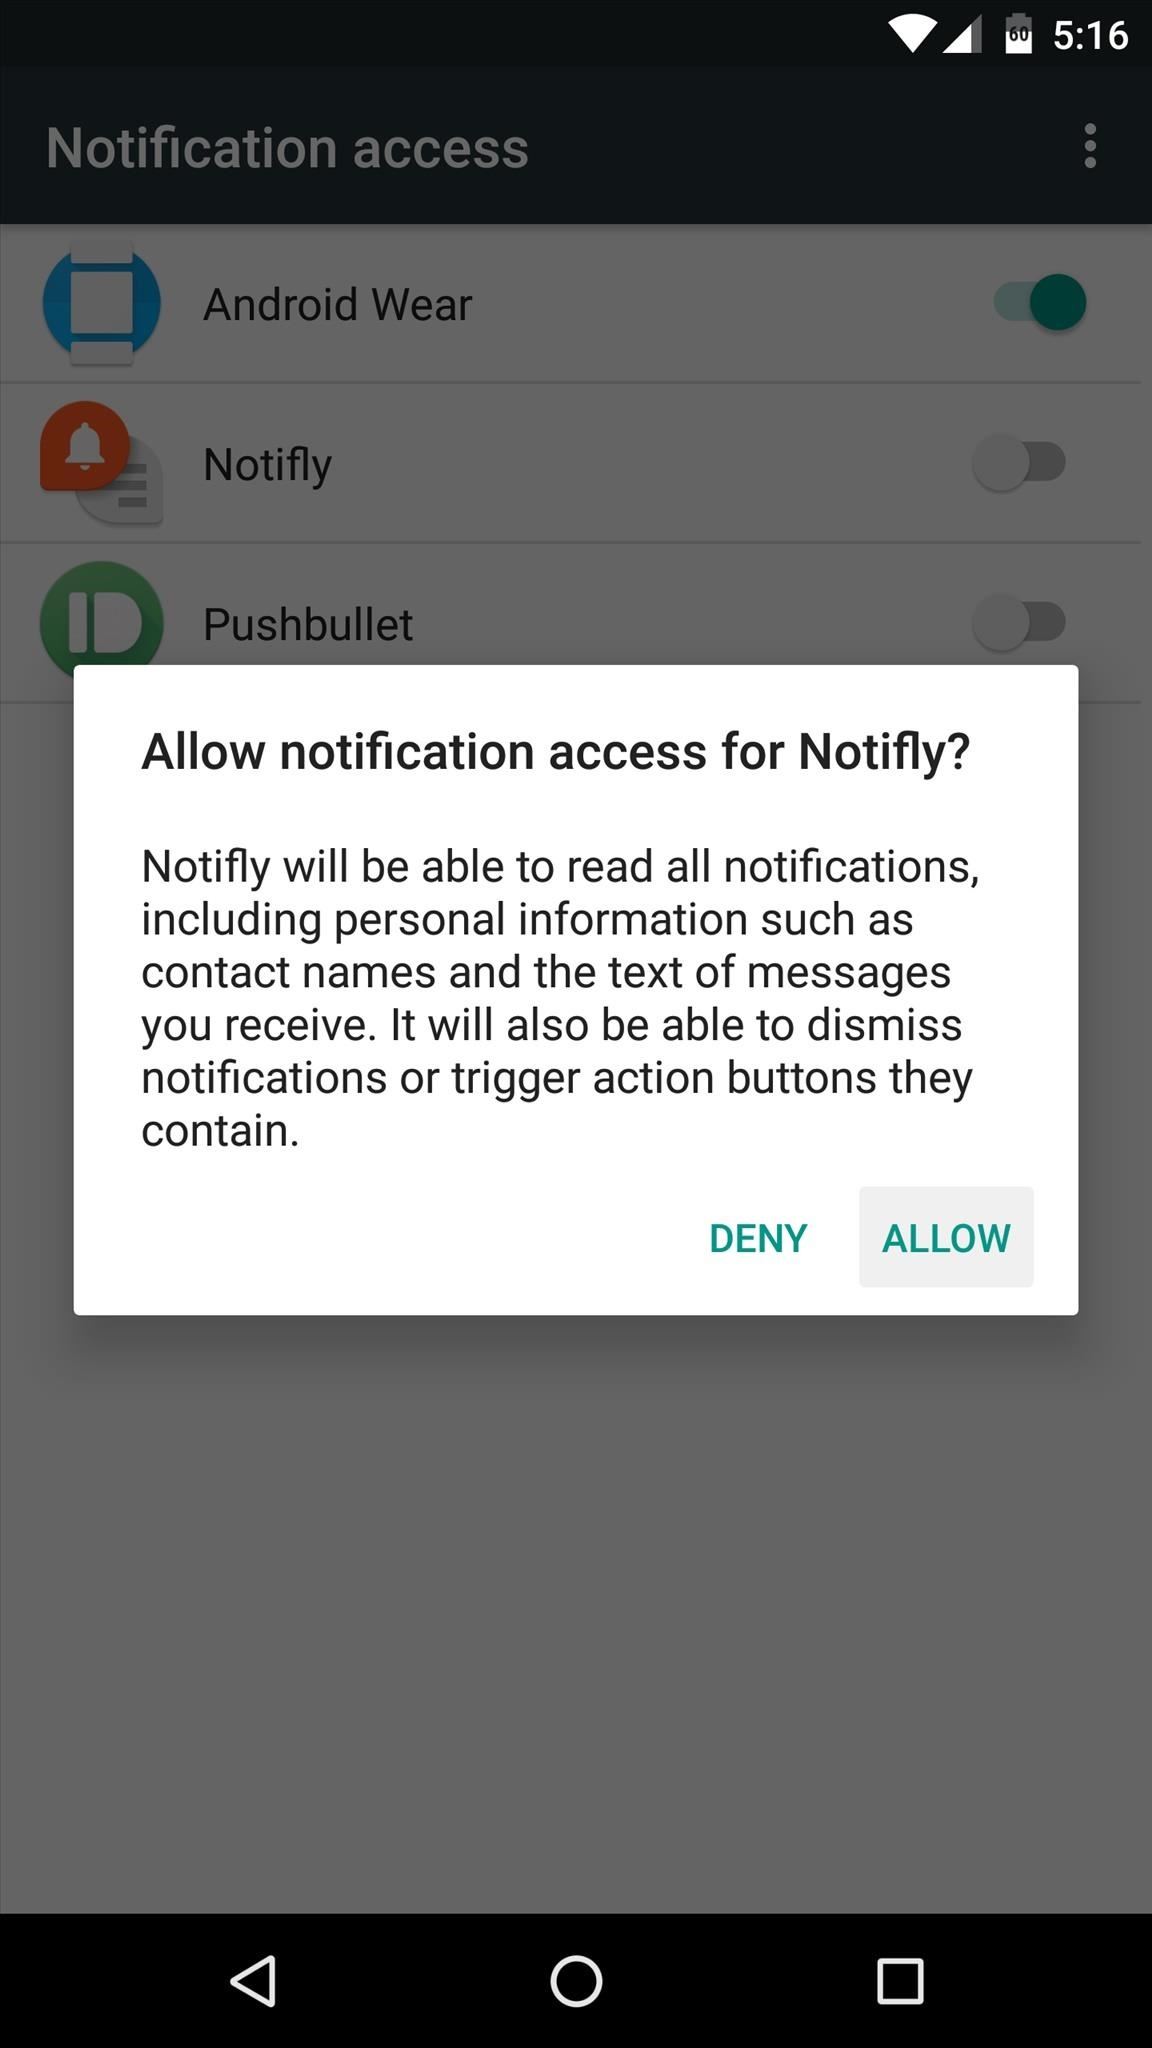 Android Nougat's Quick Reply Feature Already Looks Dated Next to This App